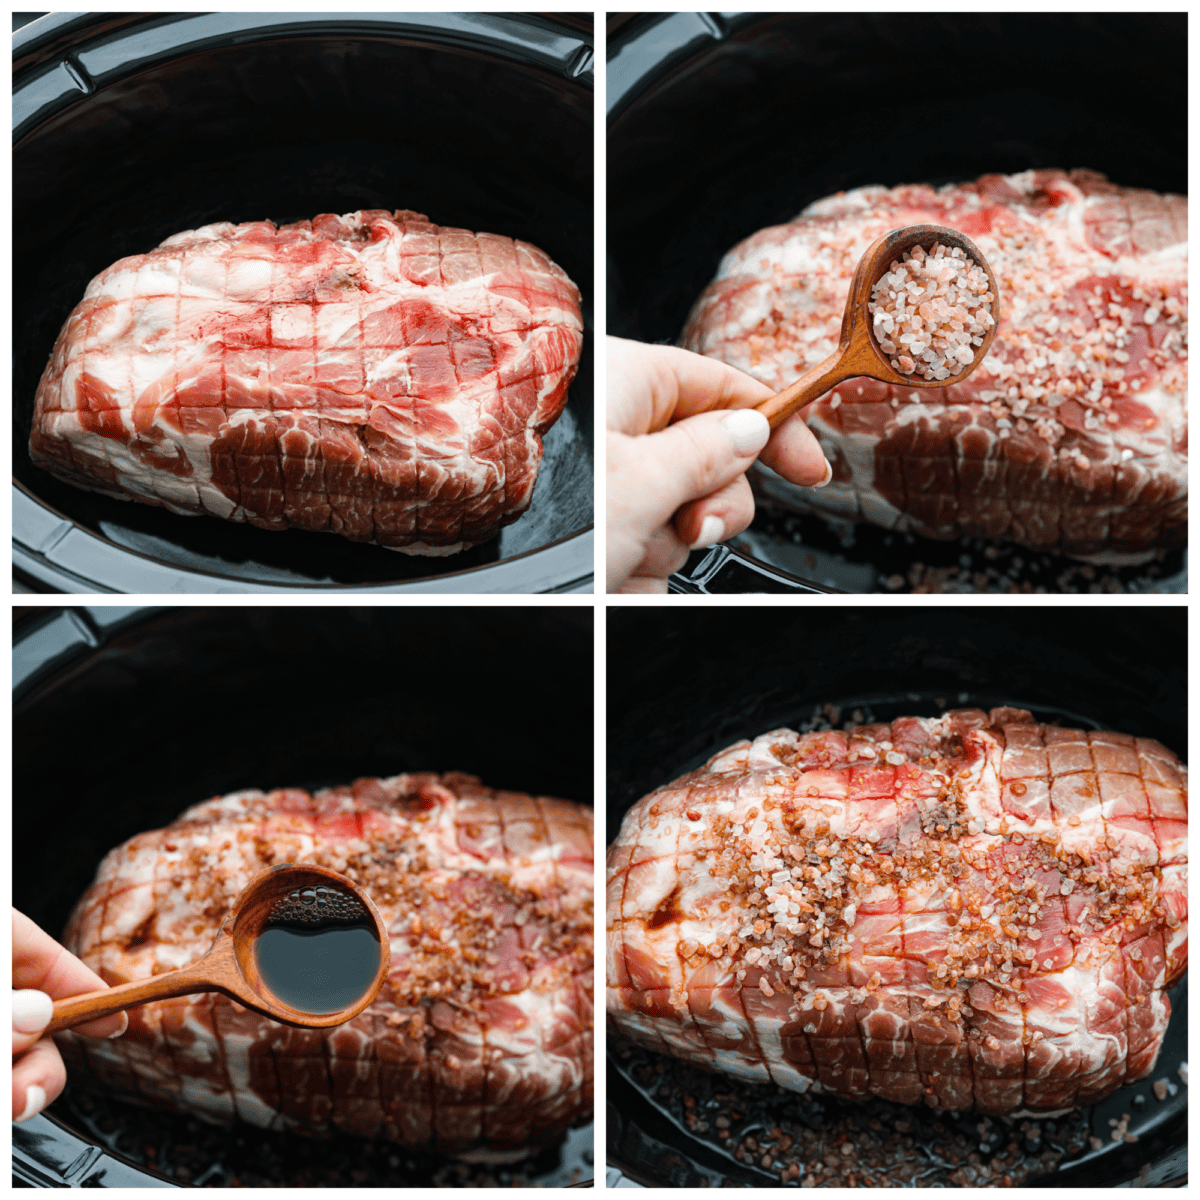 First photo of the pork roast in the slow cooker. Second photo of the salt sprinkling on the roast. Third photo of the liquid smoke pouring on the roast. Fourth photo of the roast prepped before it cooks.